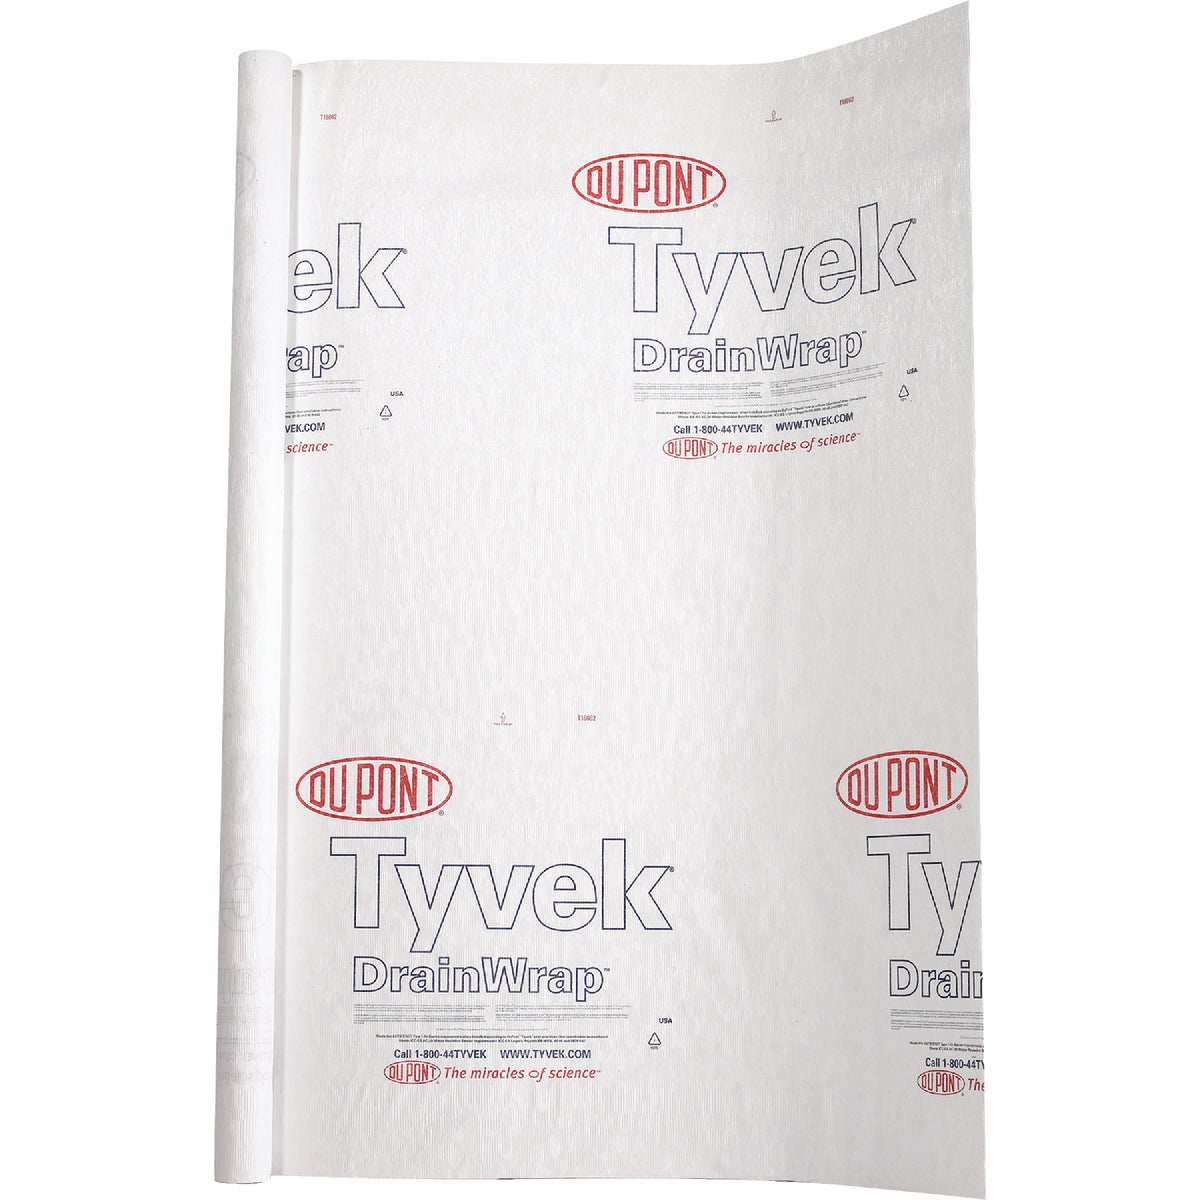 Item 100549, Dupont Tyvek DrainWrap house wrap is a vertically-grooved surface that 